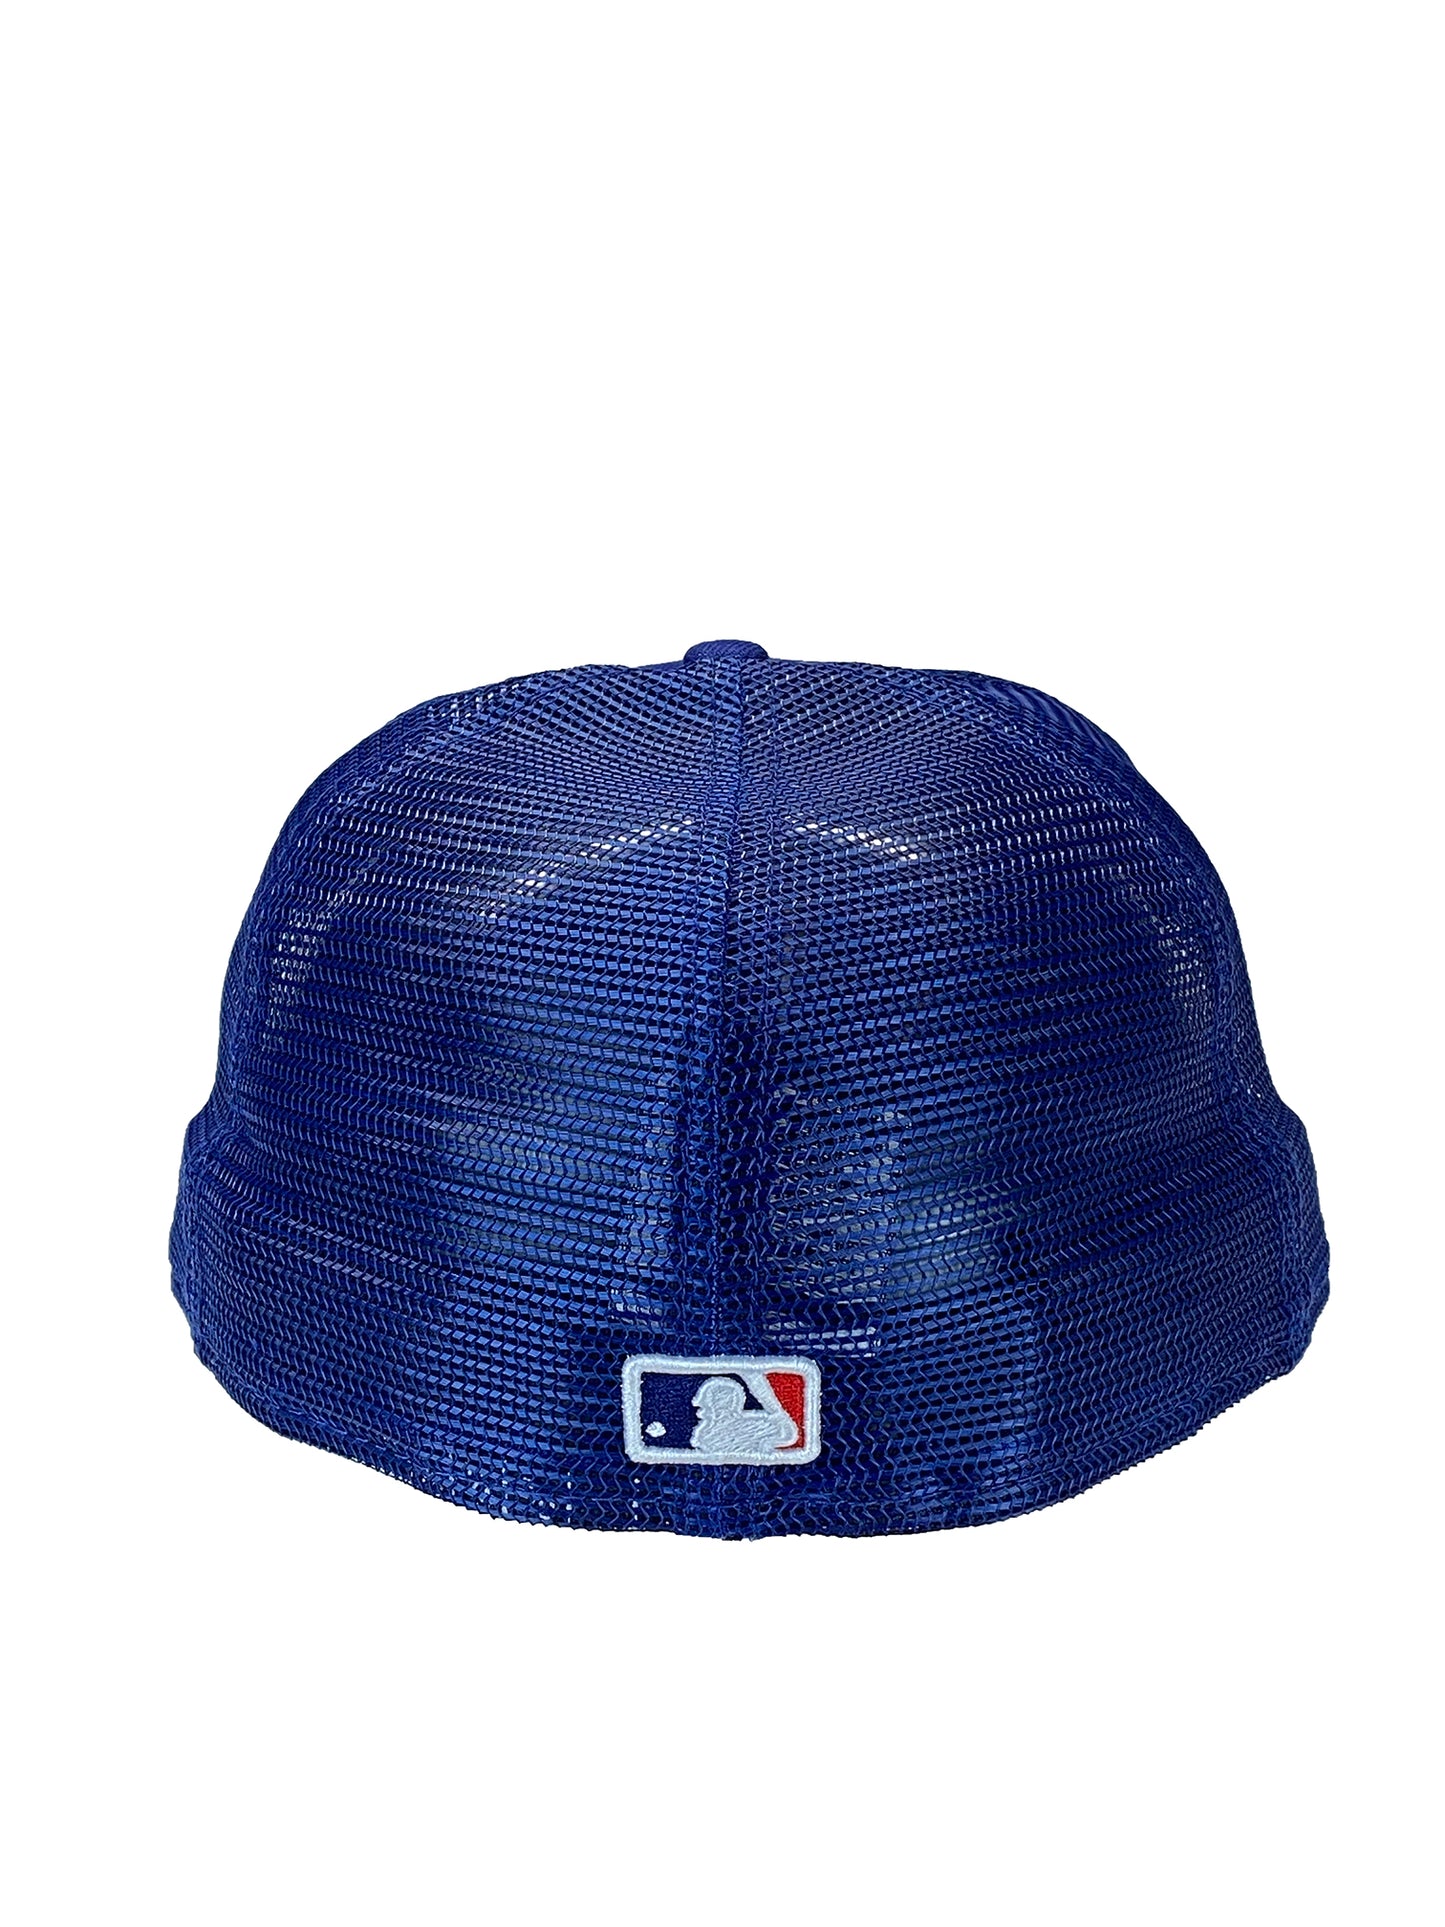 LOS ANGELES DODGERS CLASSIC TRUCKER 59FIFTY FITTED